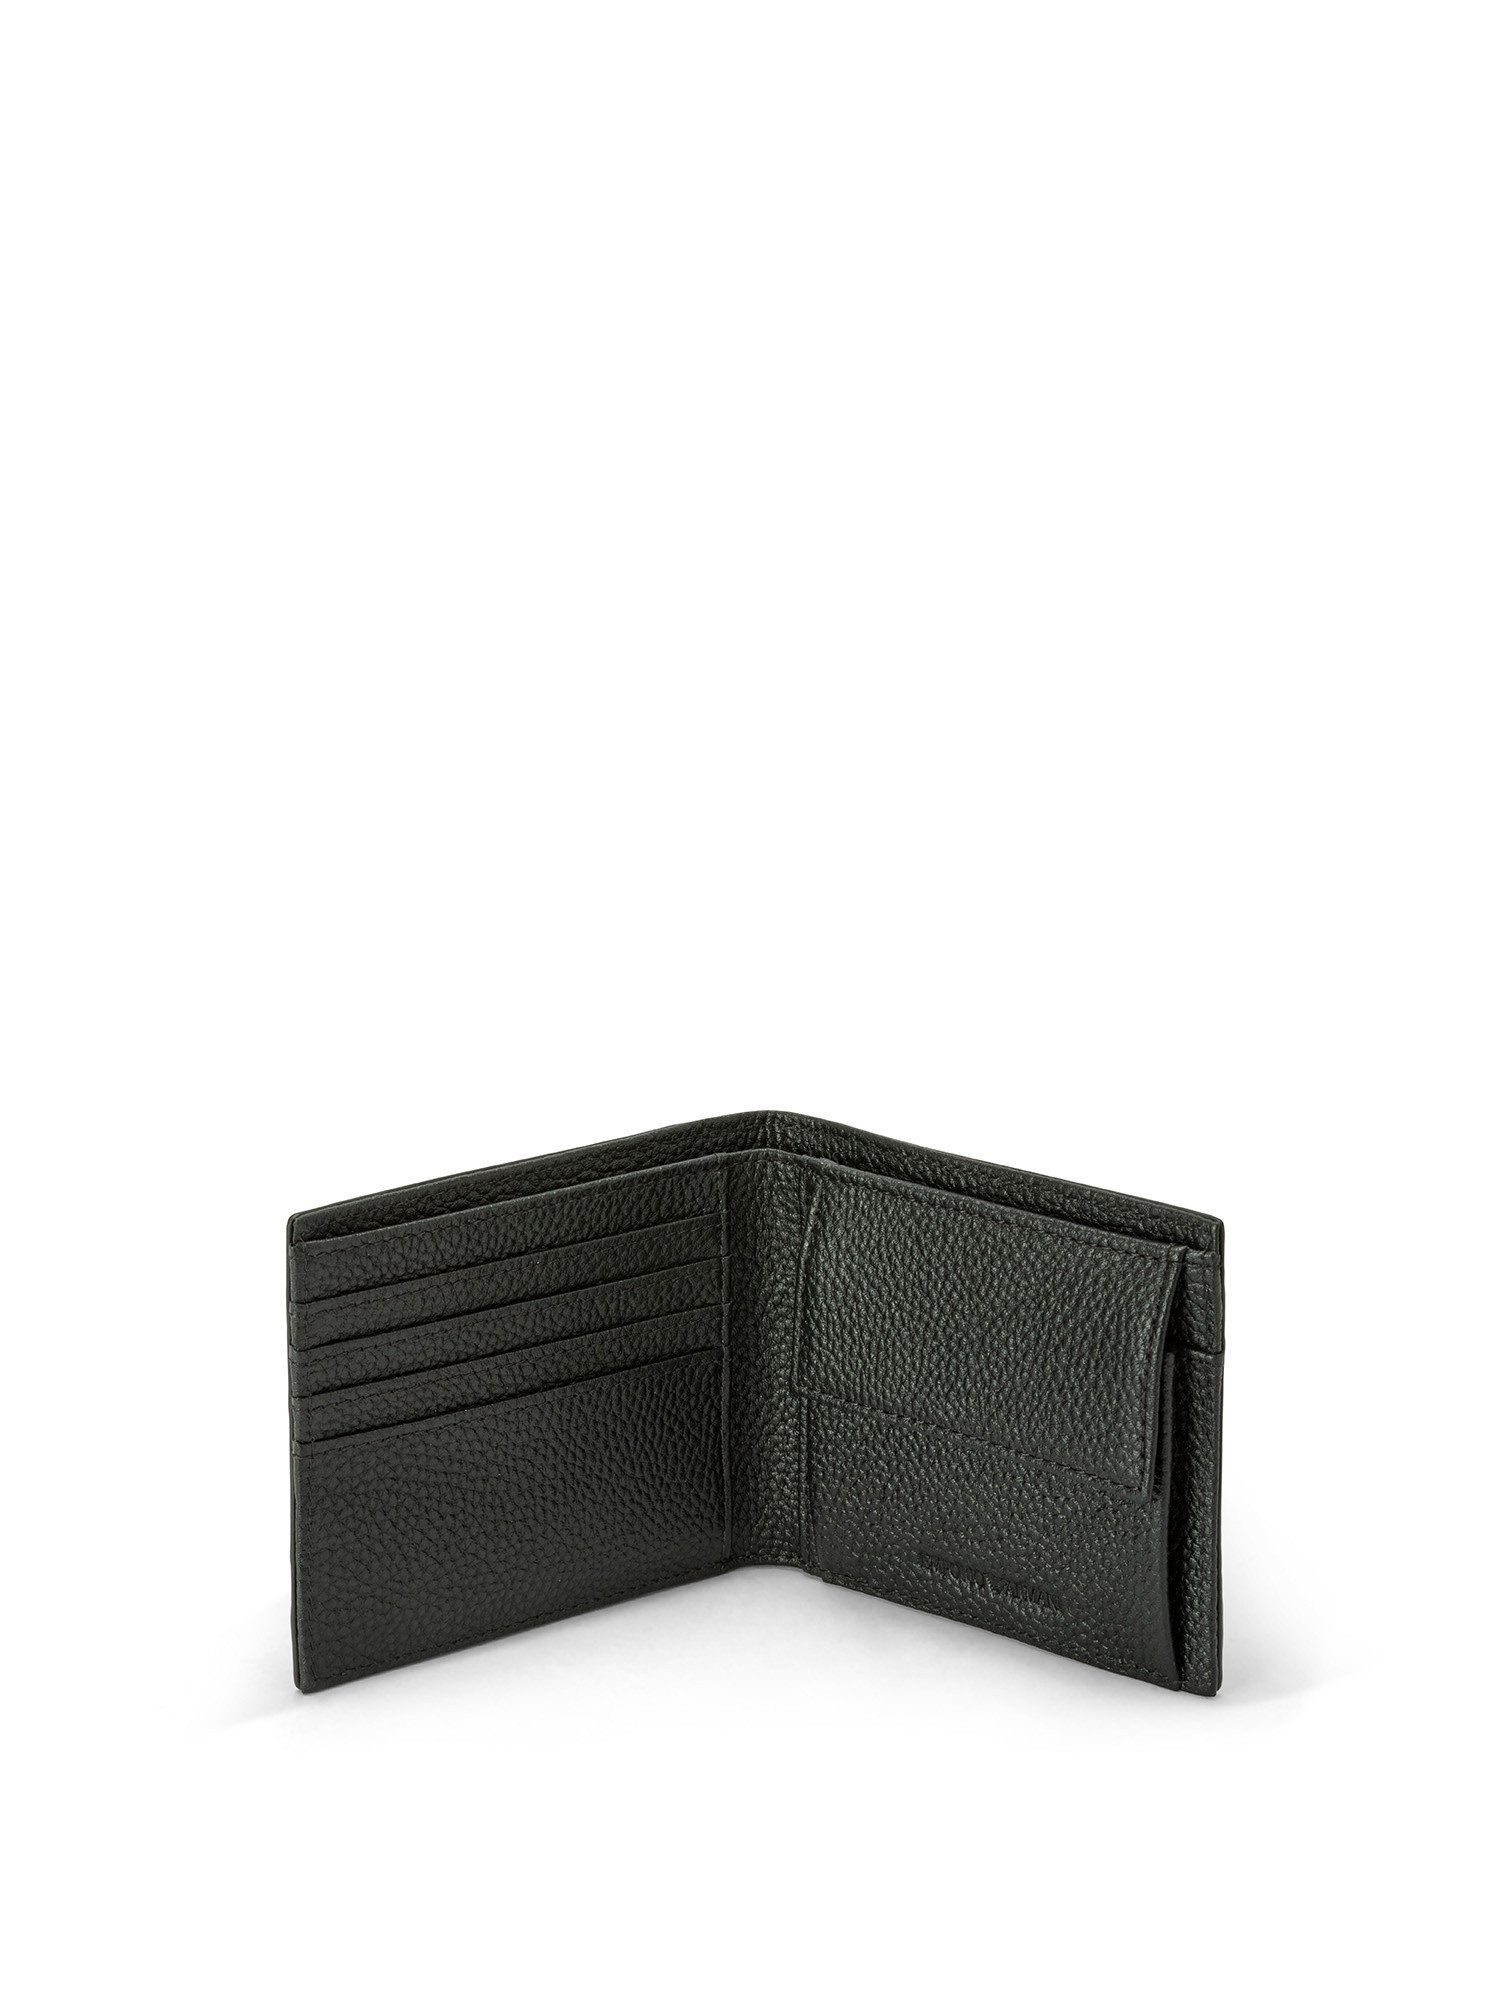 Emporio Armani - Leather wallet with all over eagle logo and coin purse, Black, large image number 2